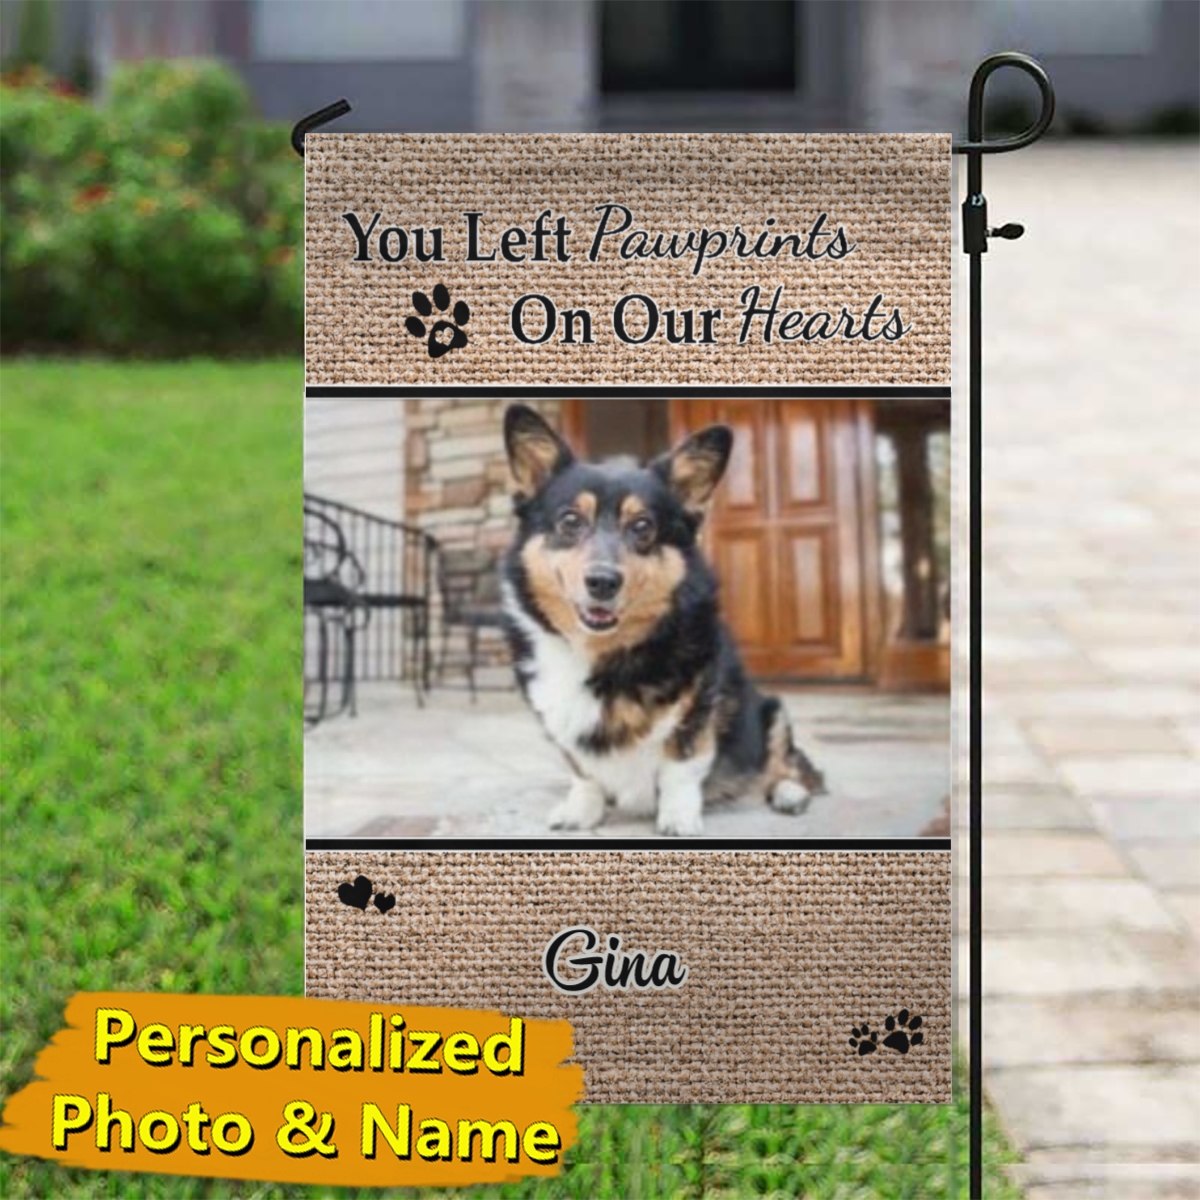 Pawprints on Our Hearts – Personalized Photo & Name – Garden Flag & House Flag